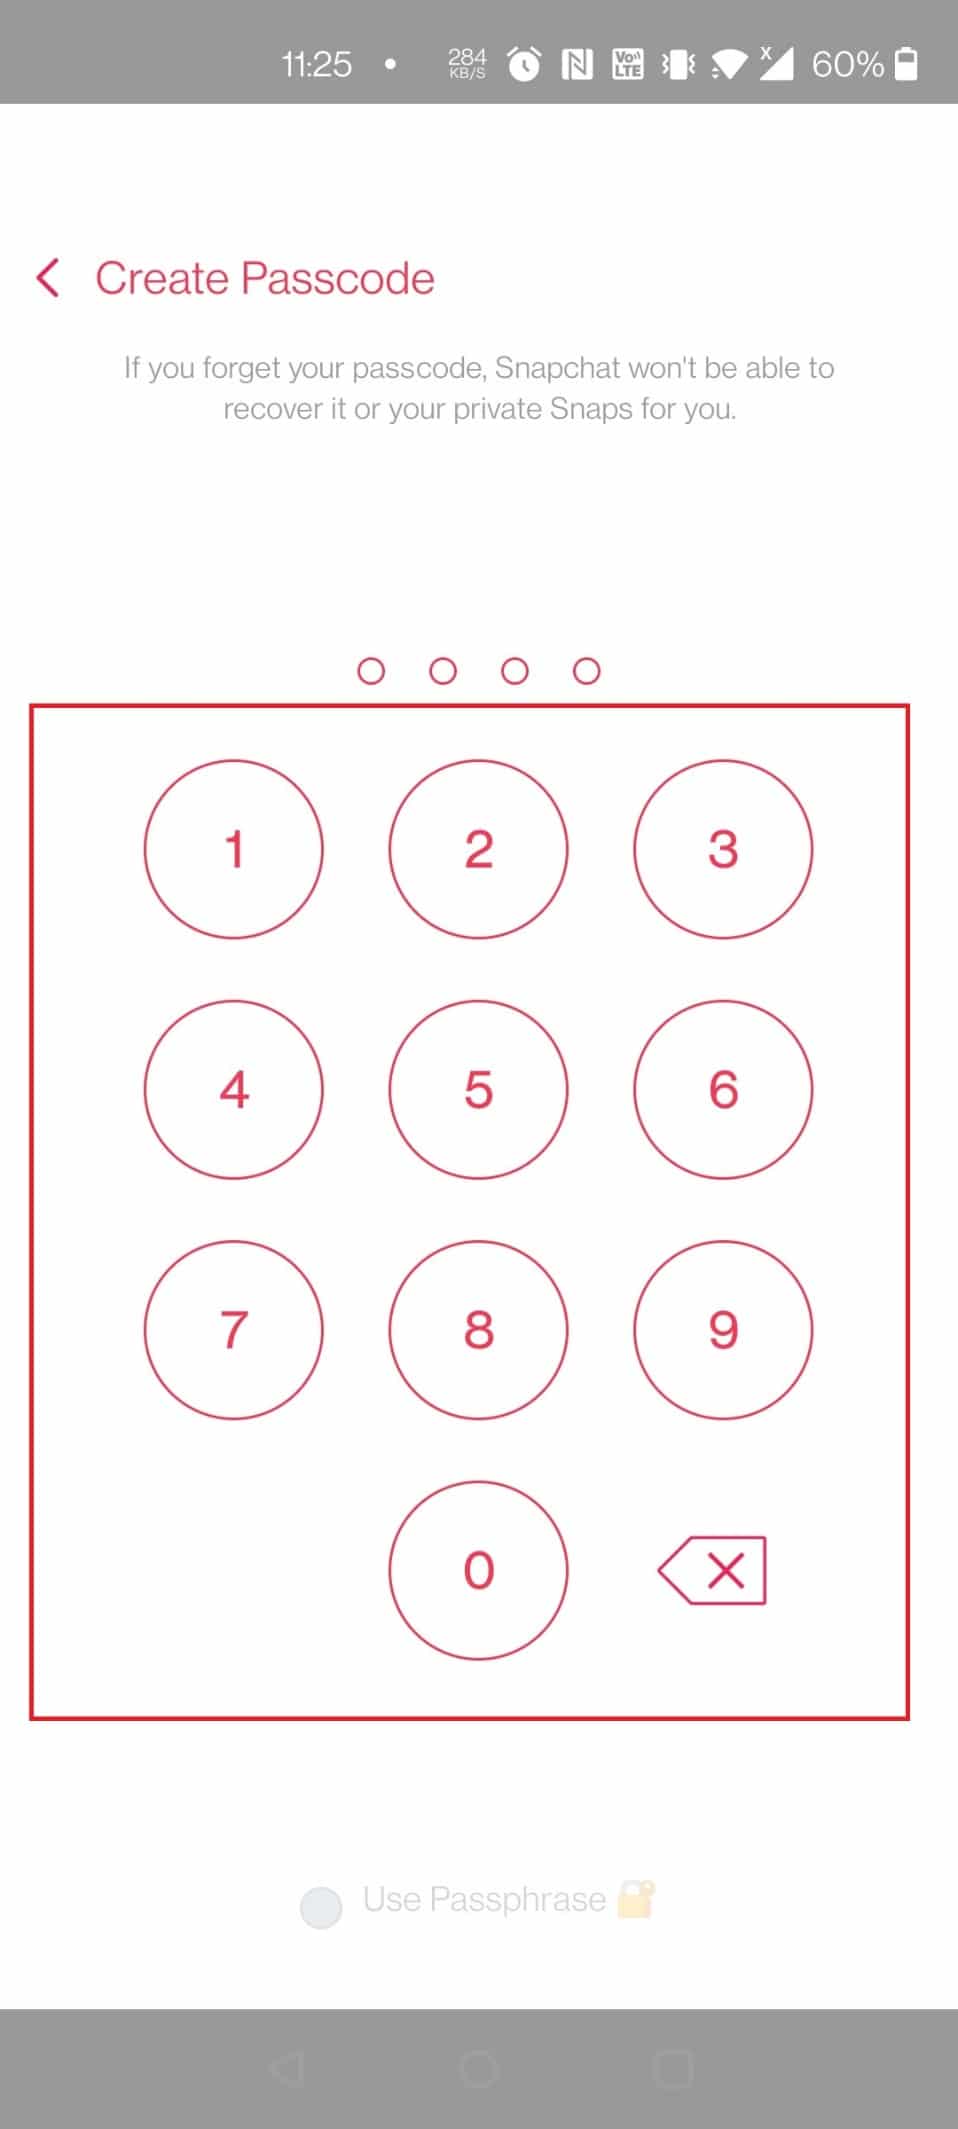 Enter passcode to activate the feature